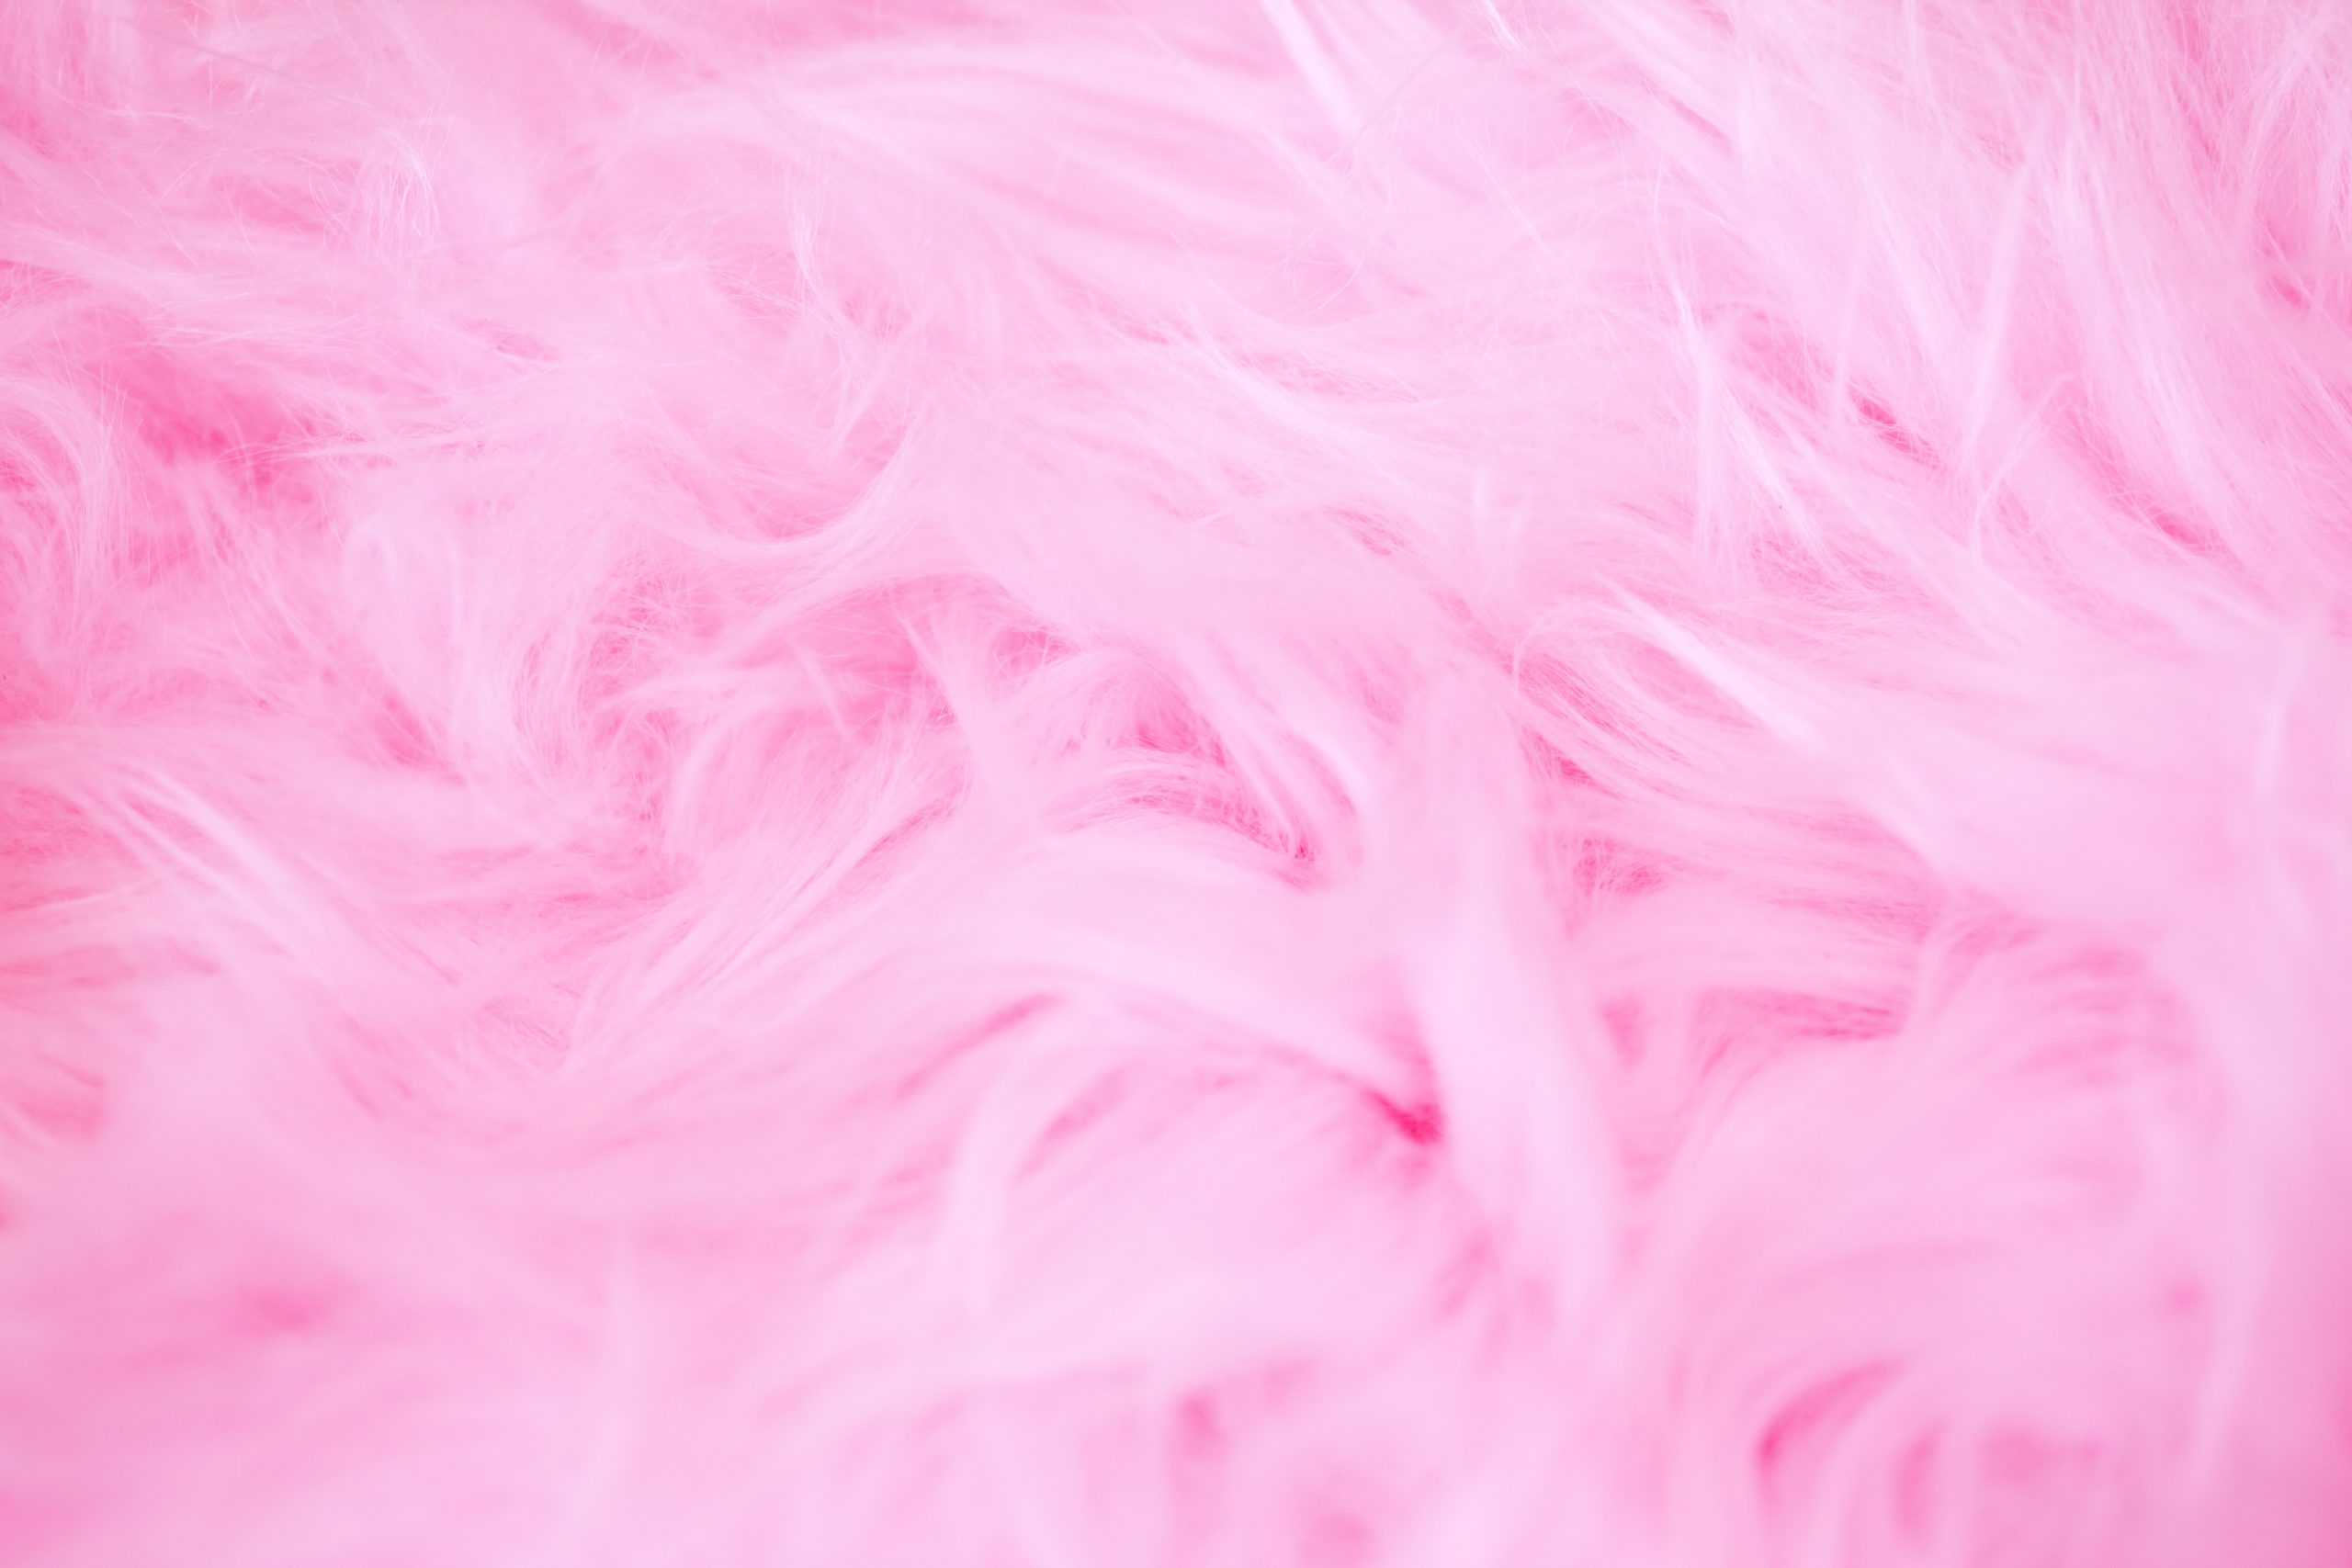 Soft and fluffy pink wallpaper